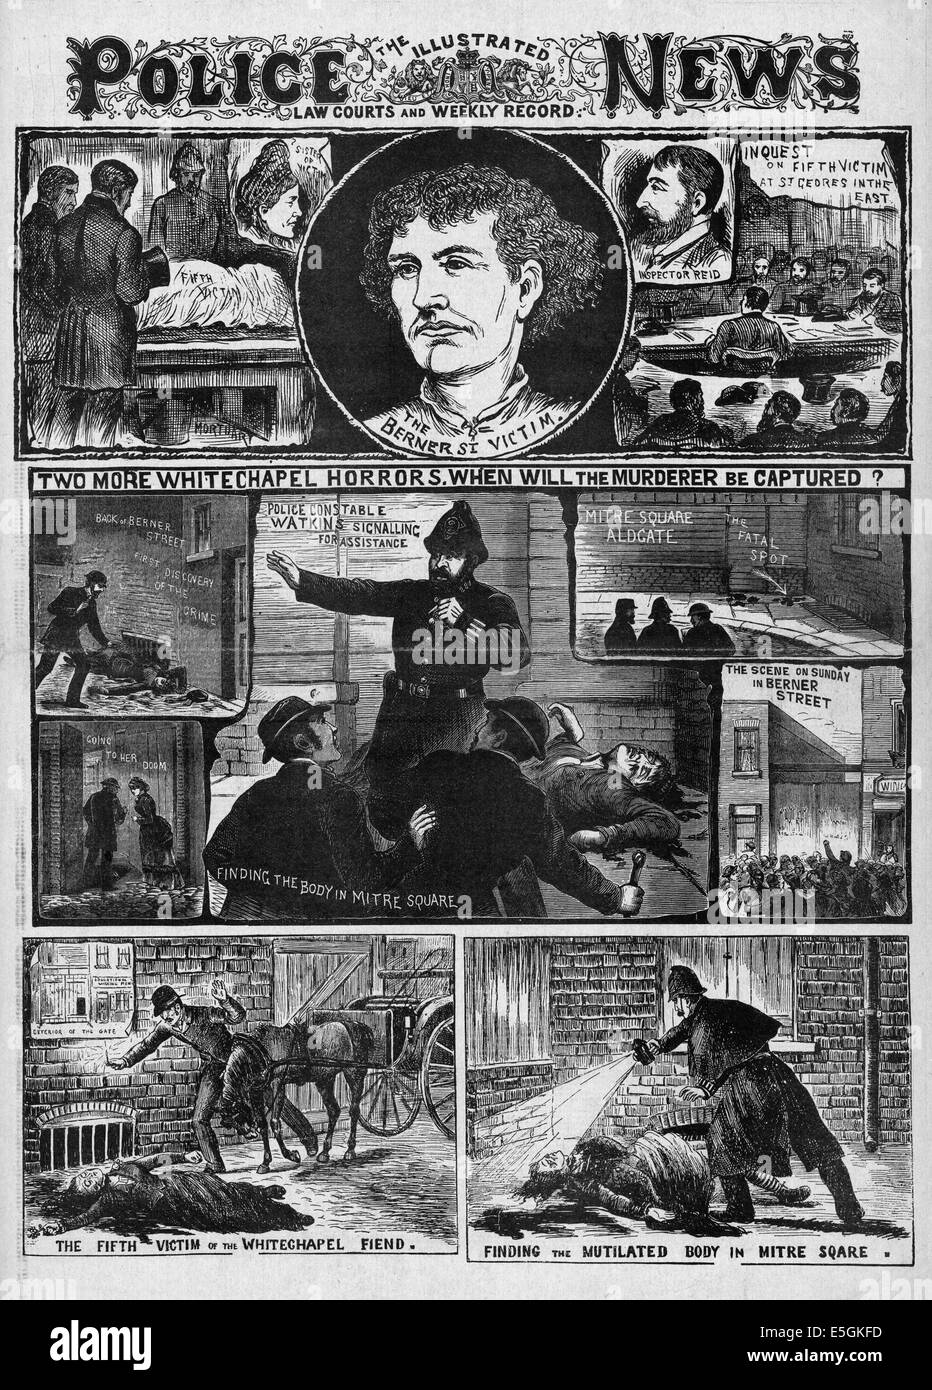 1888 Illustrated Police News front page reporting the murders by Jack the Ripper in the East End of London Stock Photo